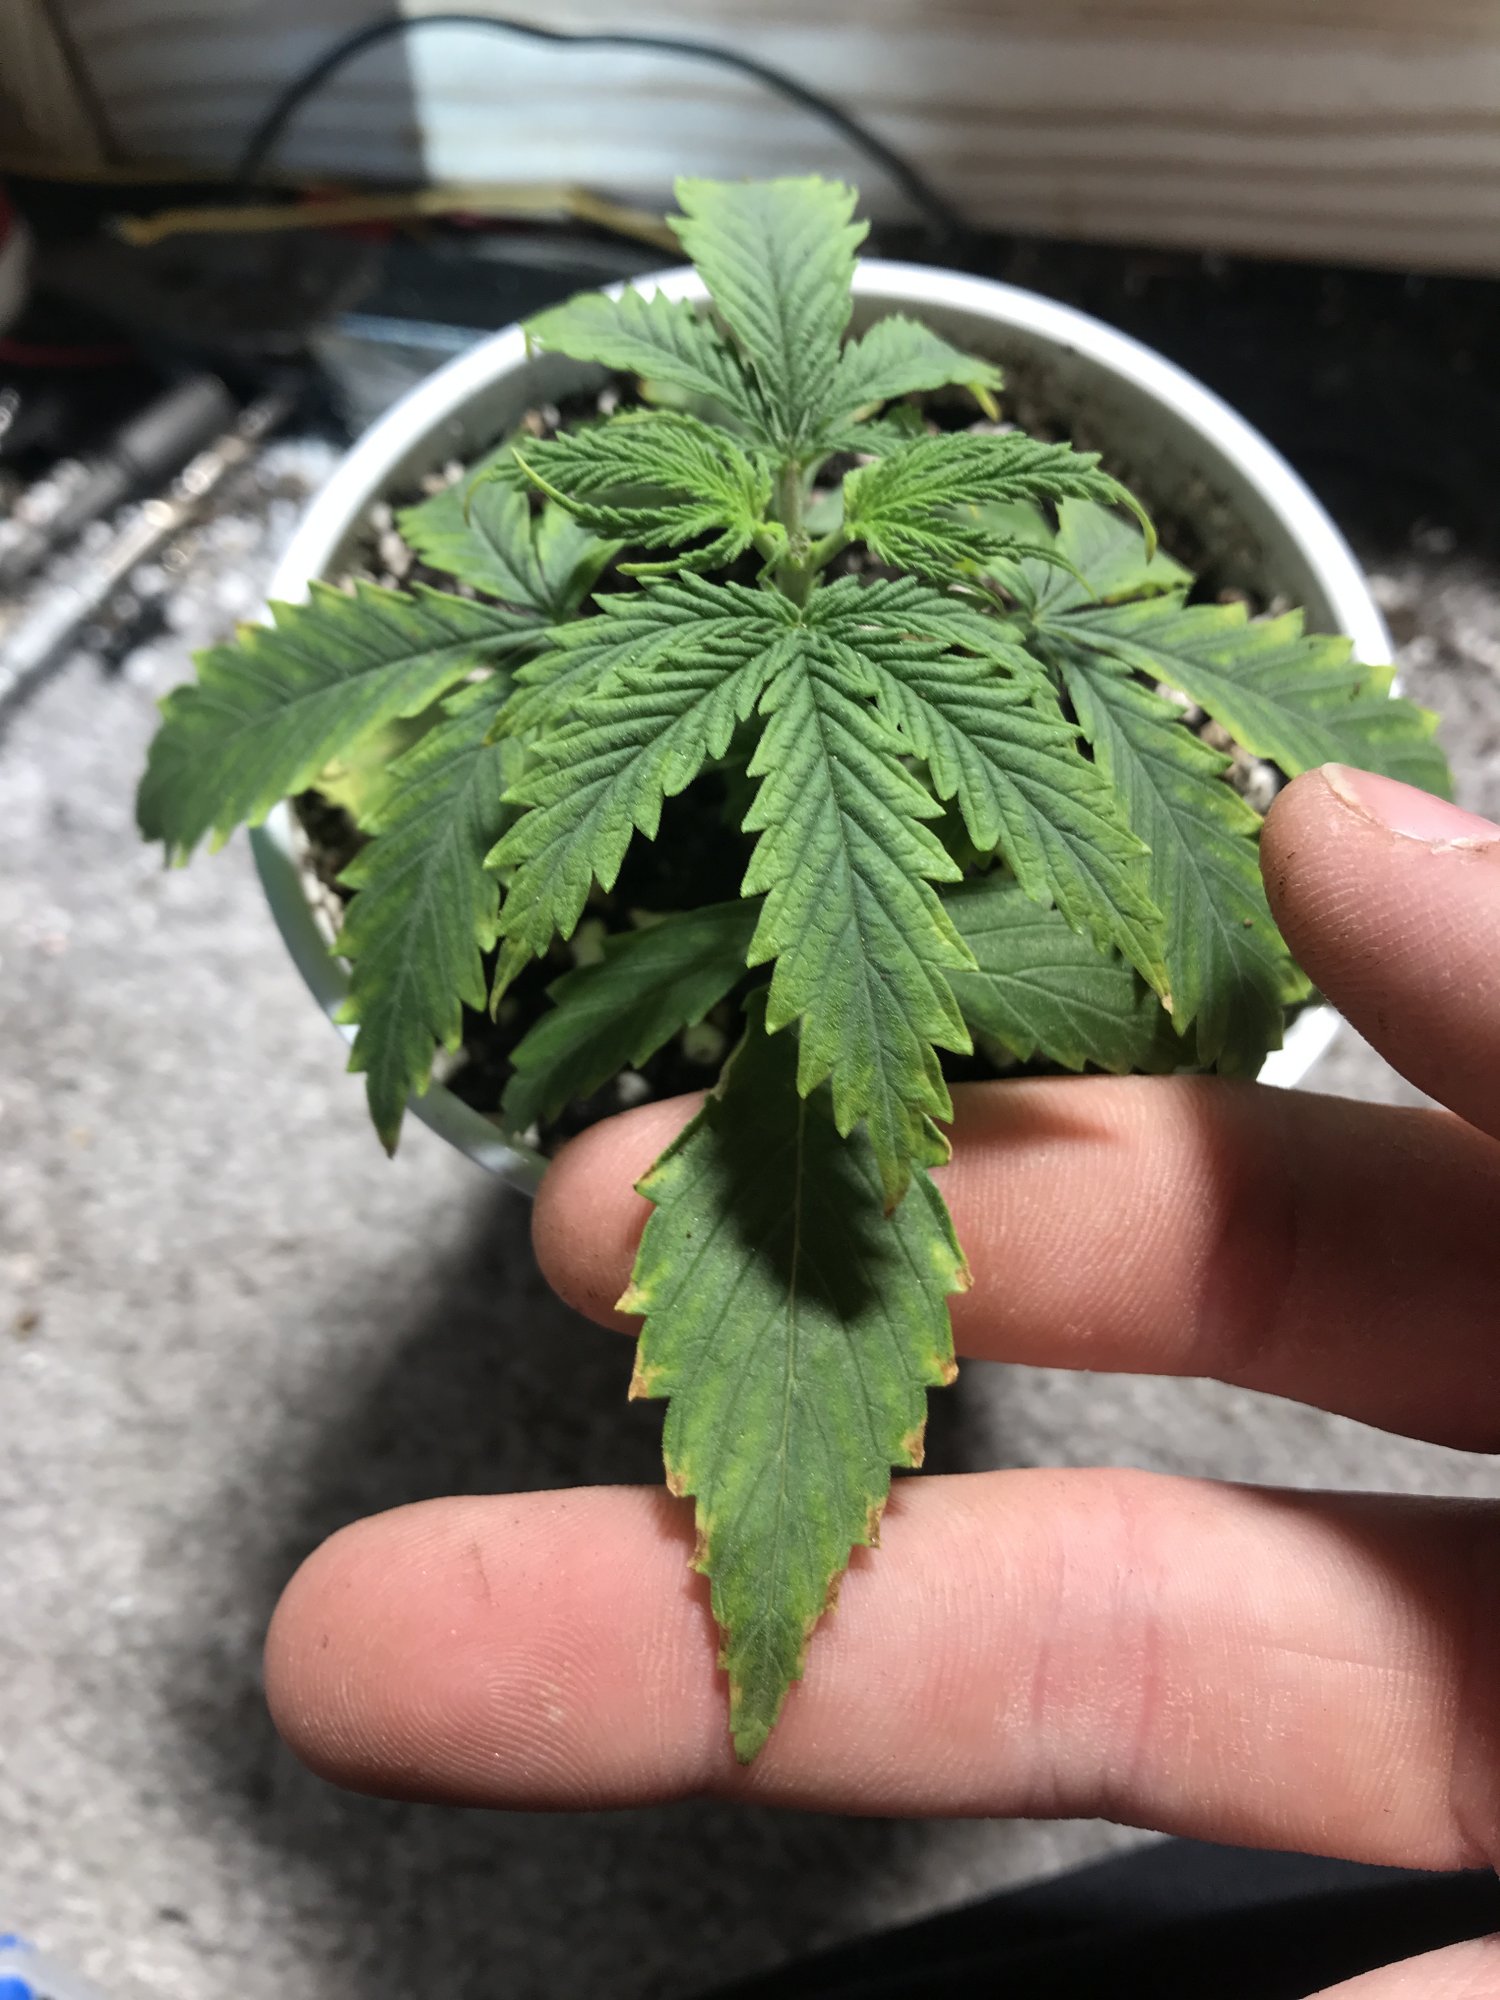 Can some one tell me what is wrong with my plant 4